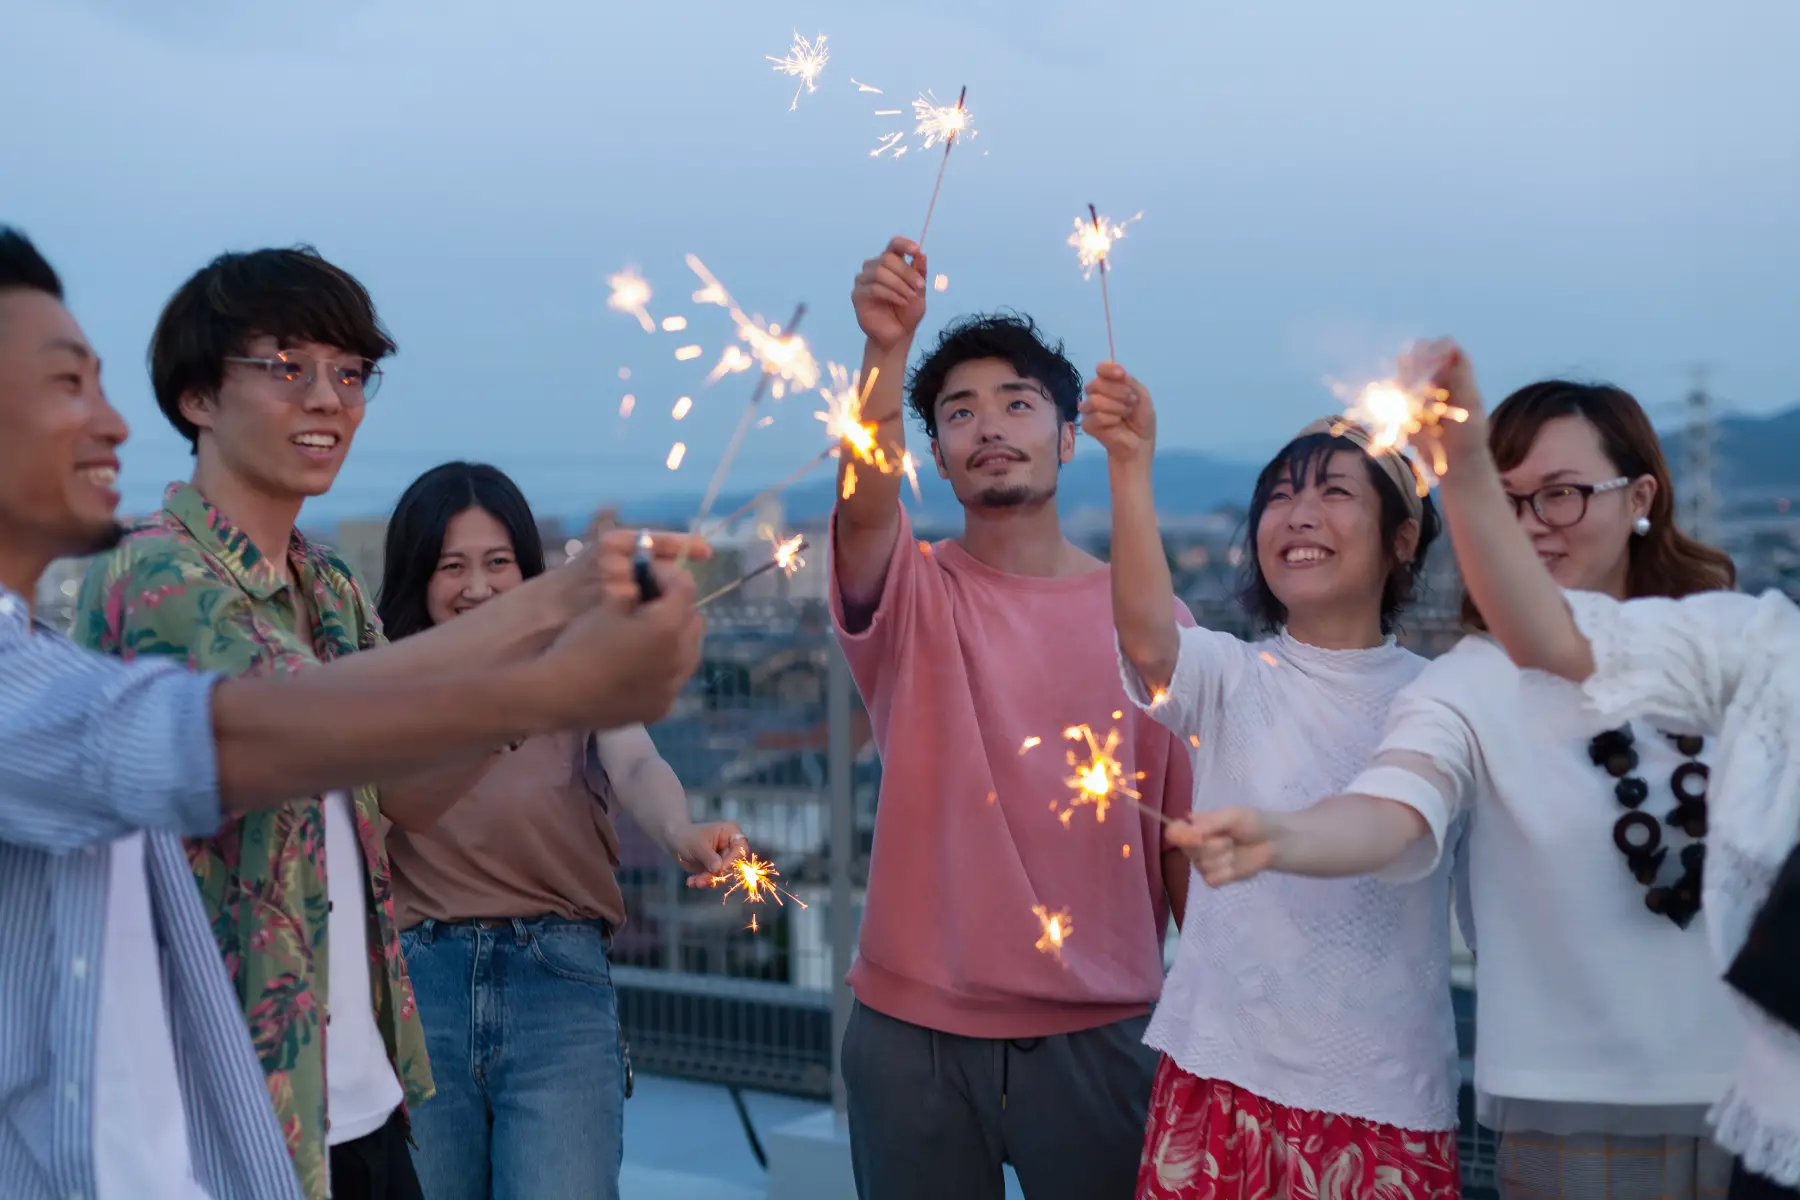 Group of six young adults holding sparklers and smiling